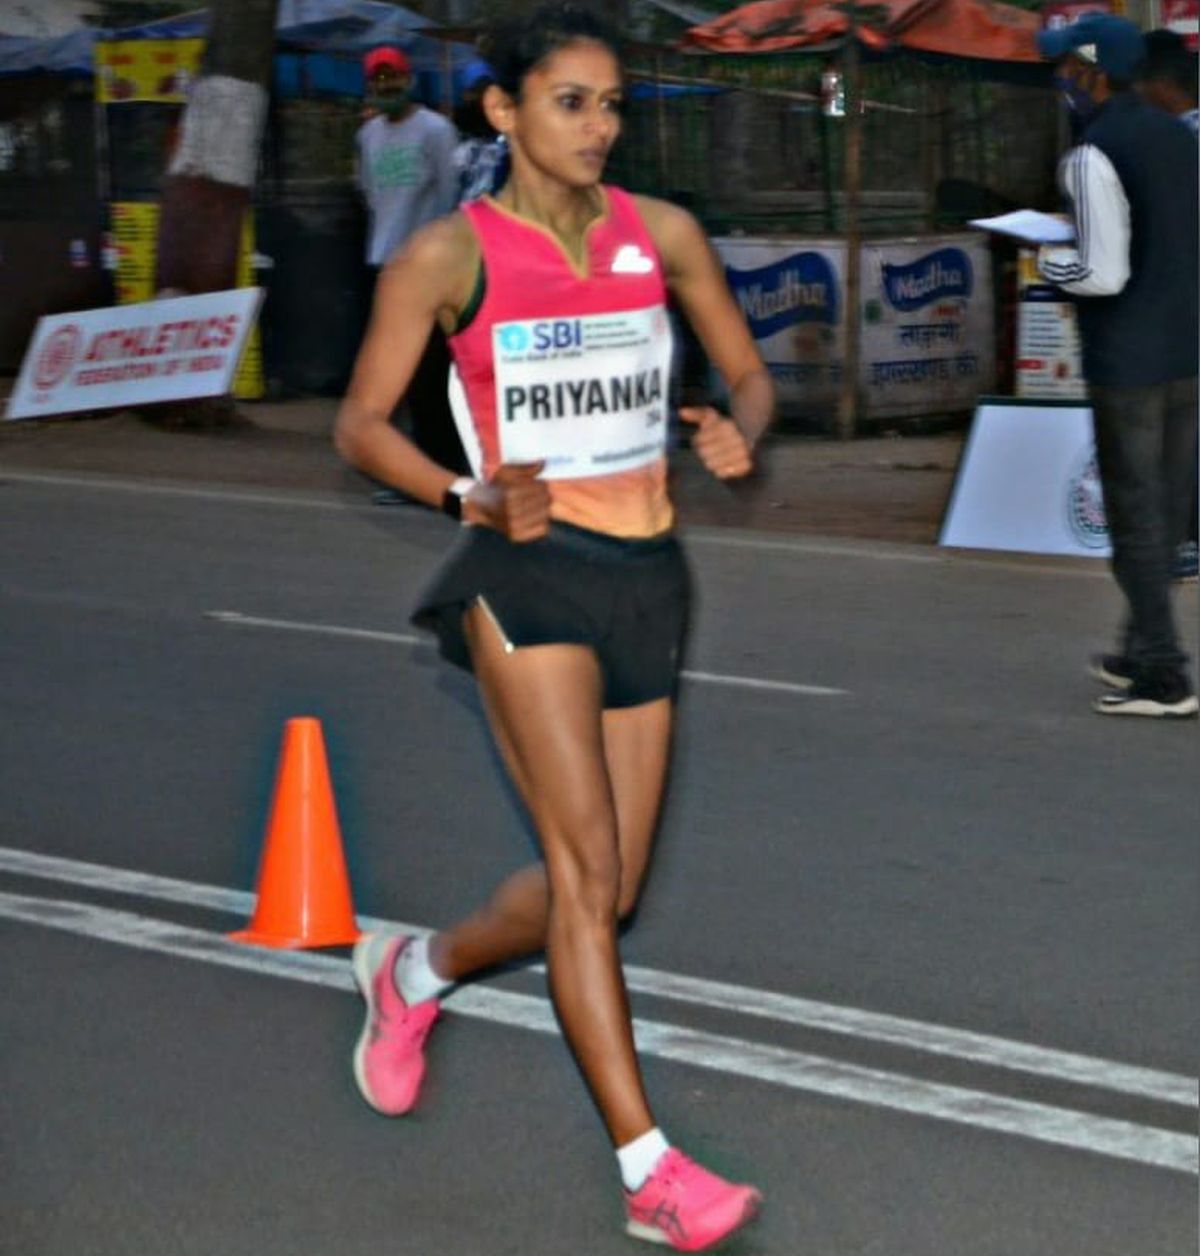 The 25-year-old Priyanka Goswami clocked 1 hr 32 minute 36 seconds, well outside her personal best of 1:28:45 